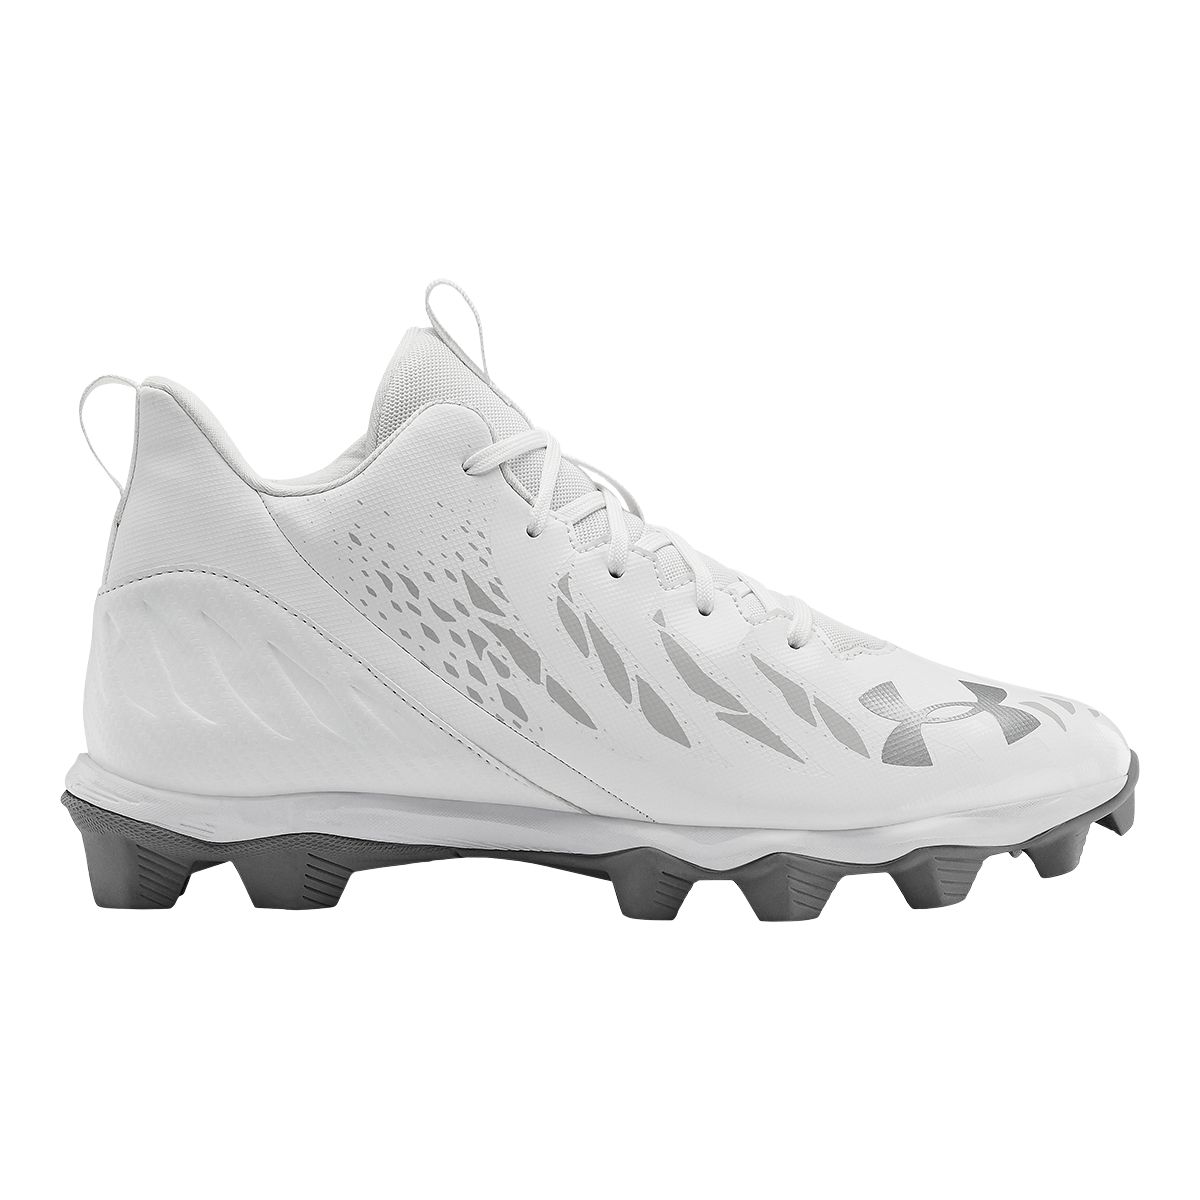 Image of Under Armour Men's Spotlight Franchise Football Cleats Low Top